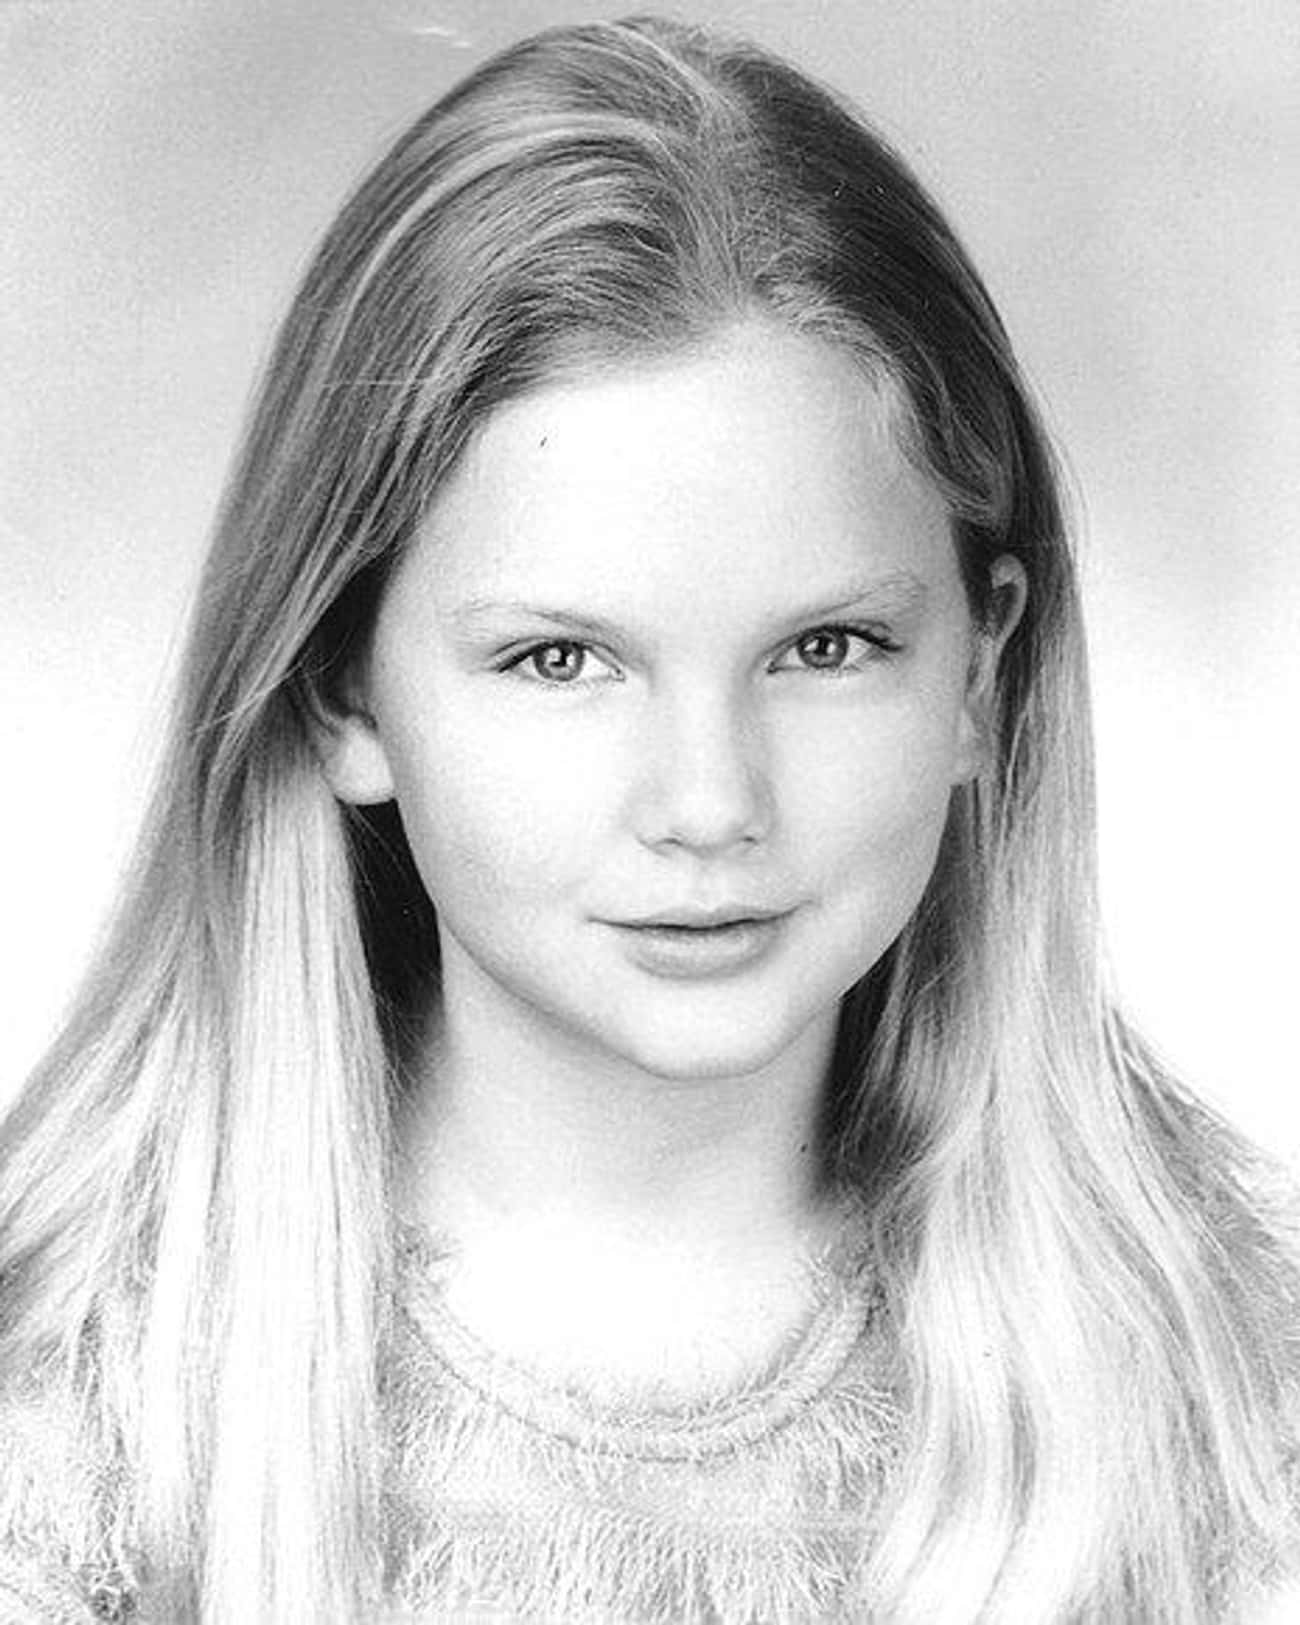 Young Taylor Swift School Photo